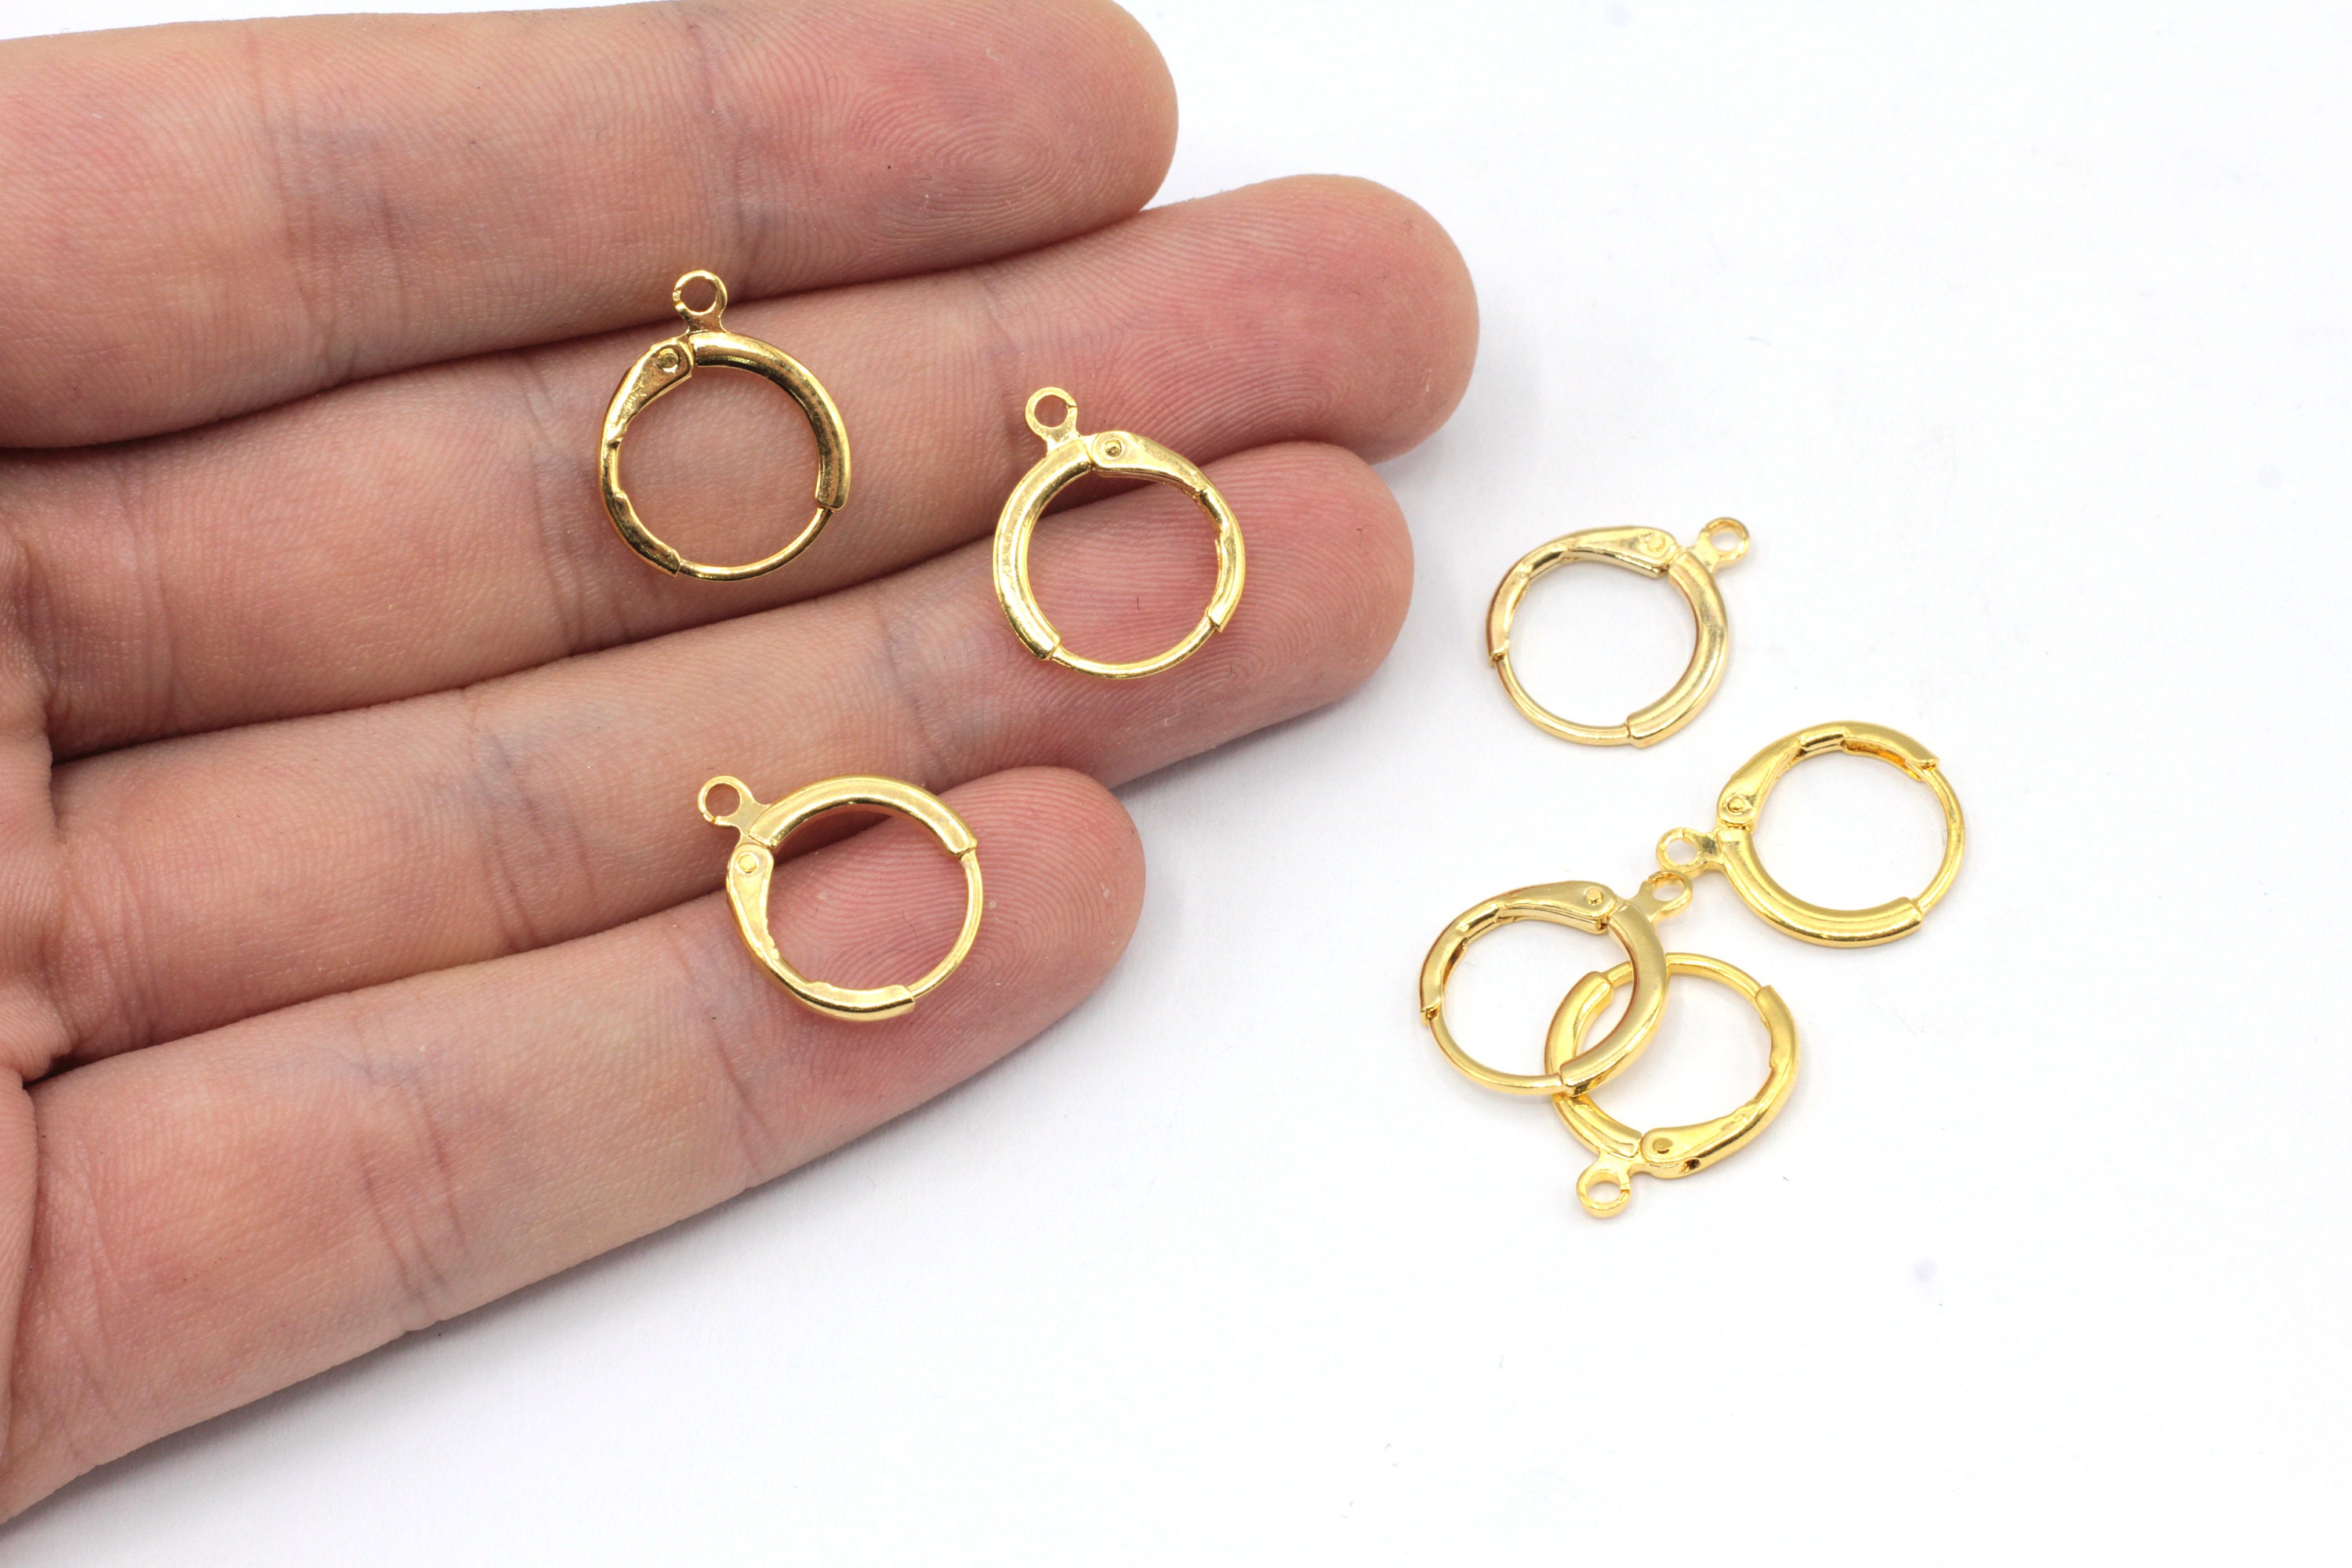 140pcs Hoop Earring Findings, Beading Hoop Earring Components with Earring  Hooks and Jump Rings for Earring Jewelry Making (Platinum & Goldend) 